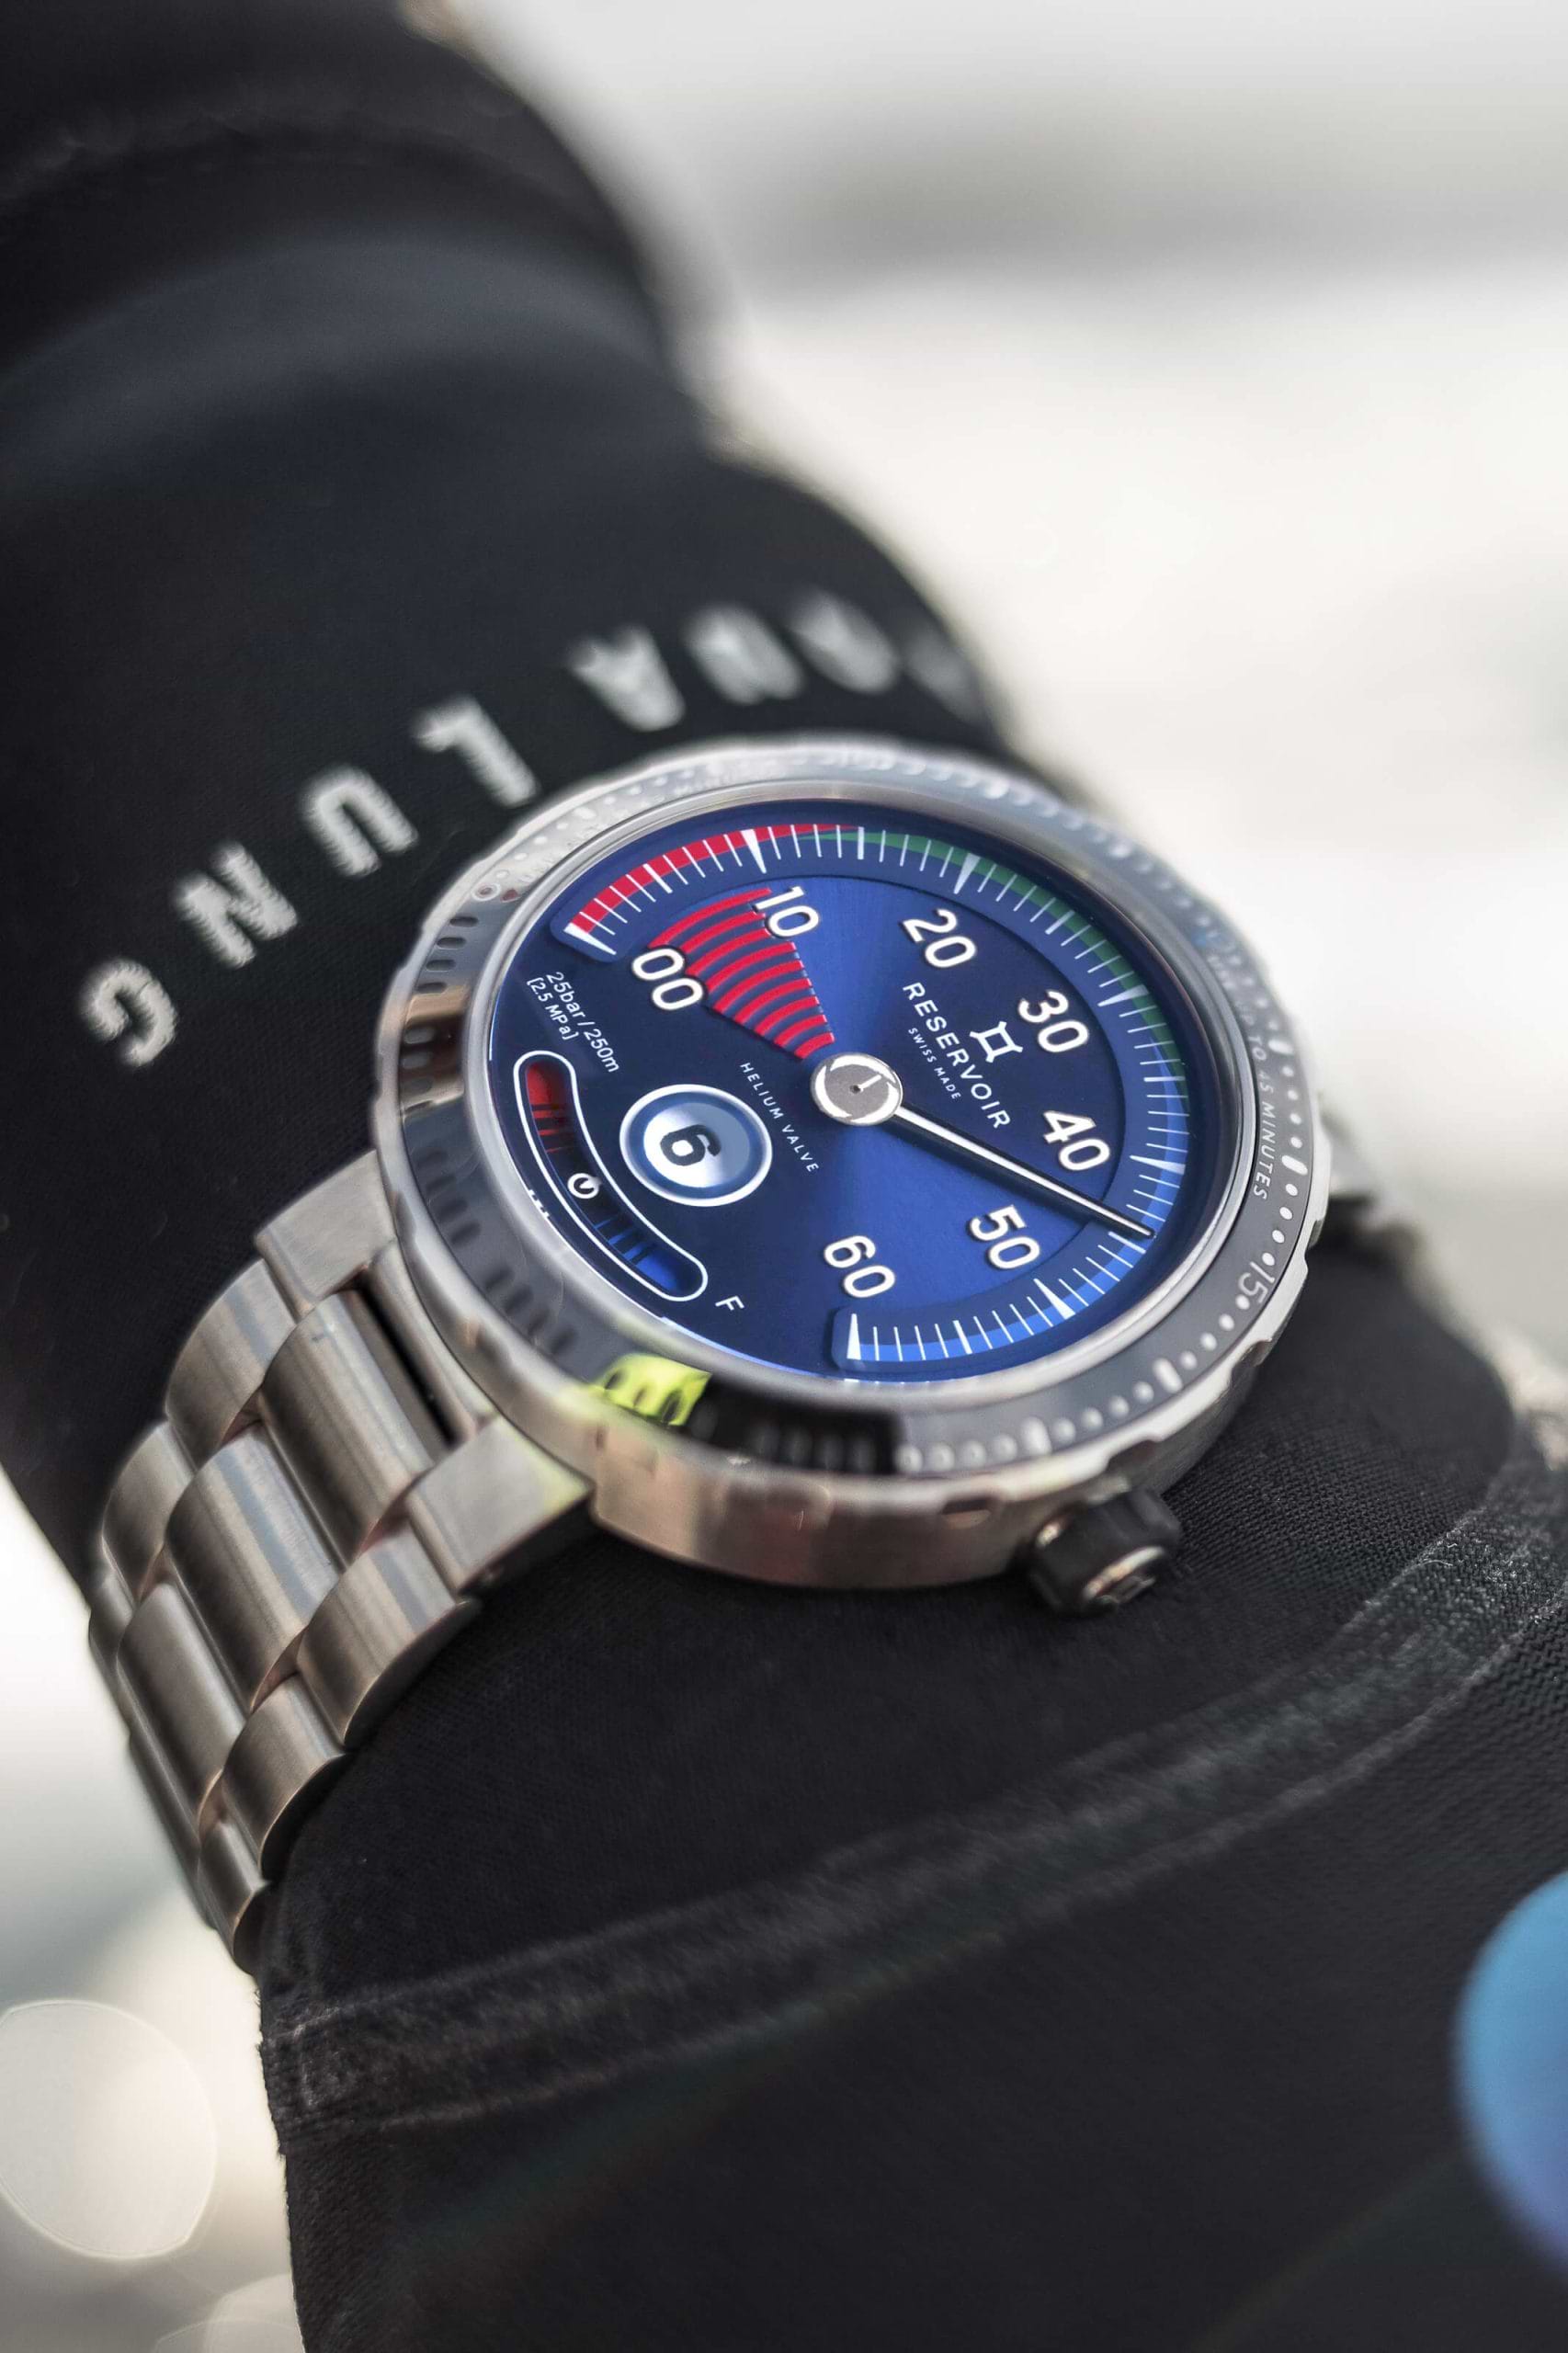 Luxury Diver's Watch with Dark Blue, Light Grey and Medium Grey-Blue Manometer by Greg Lecoeur.